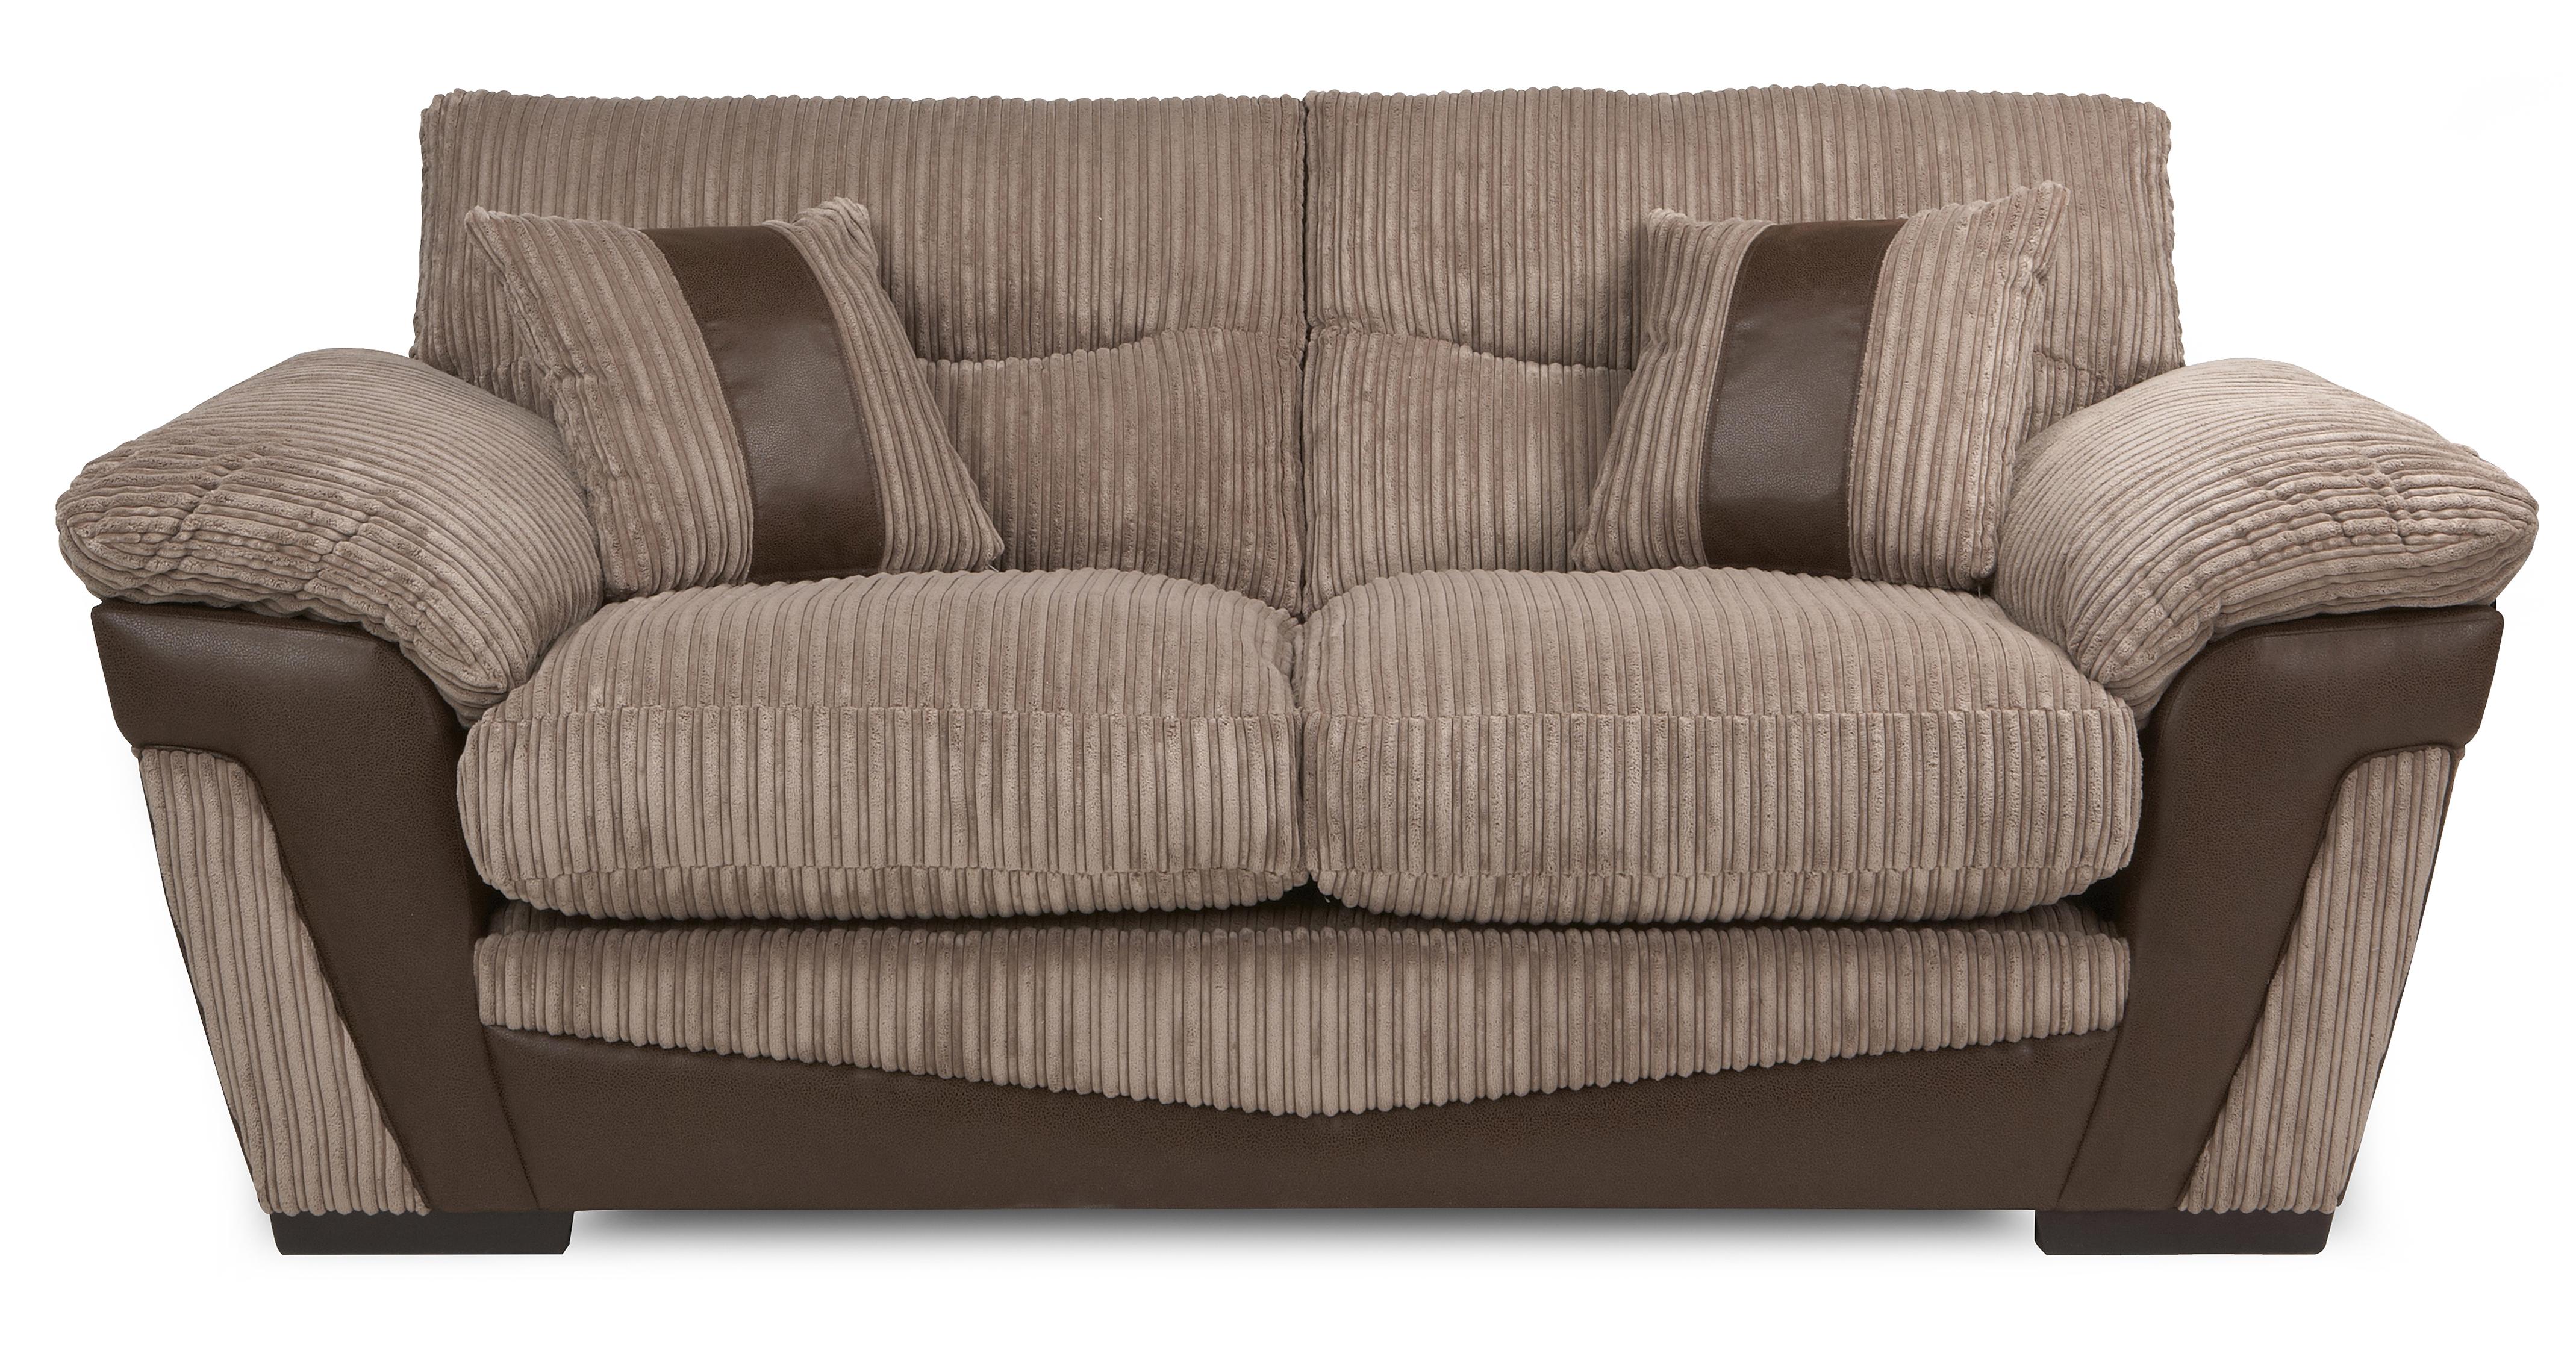 used sofa bed for sale in miami